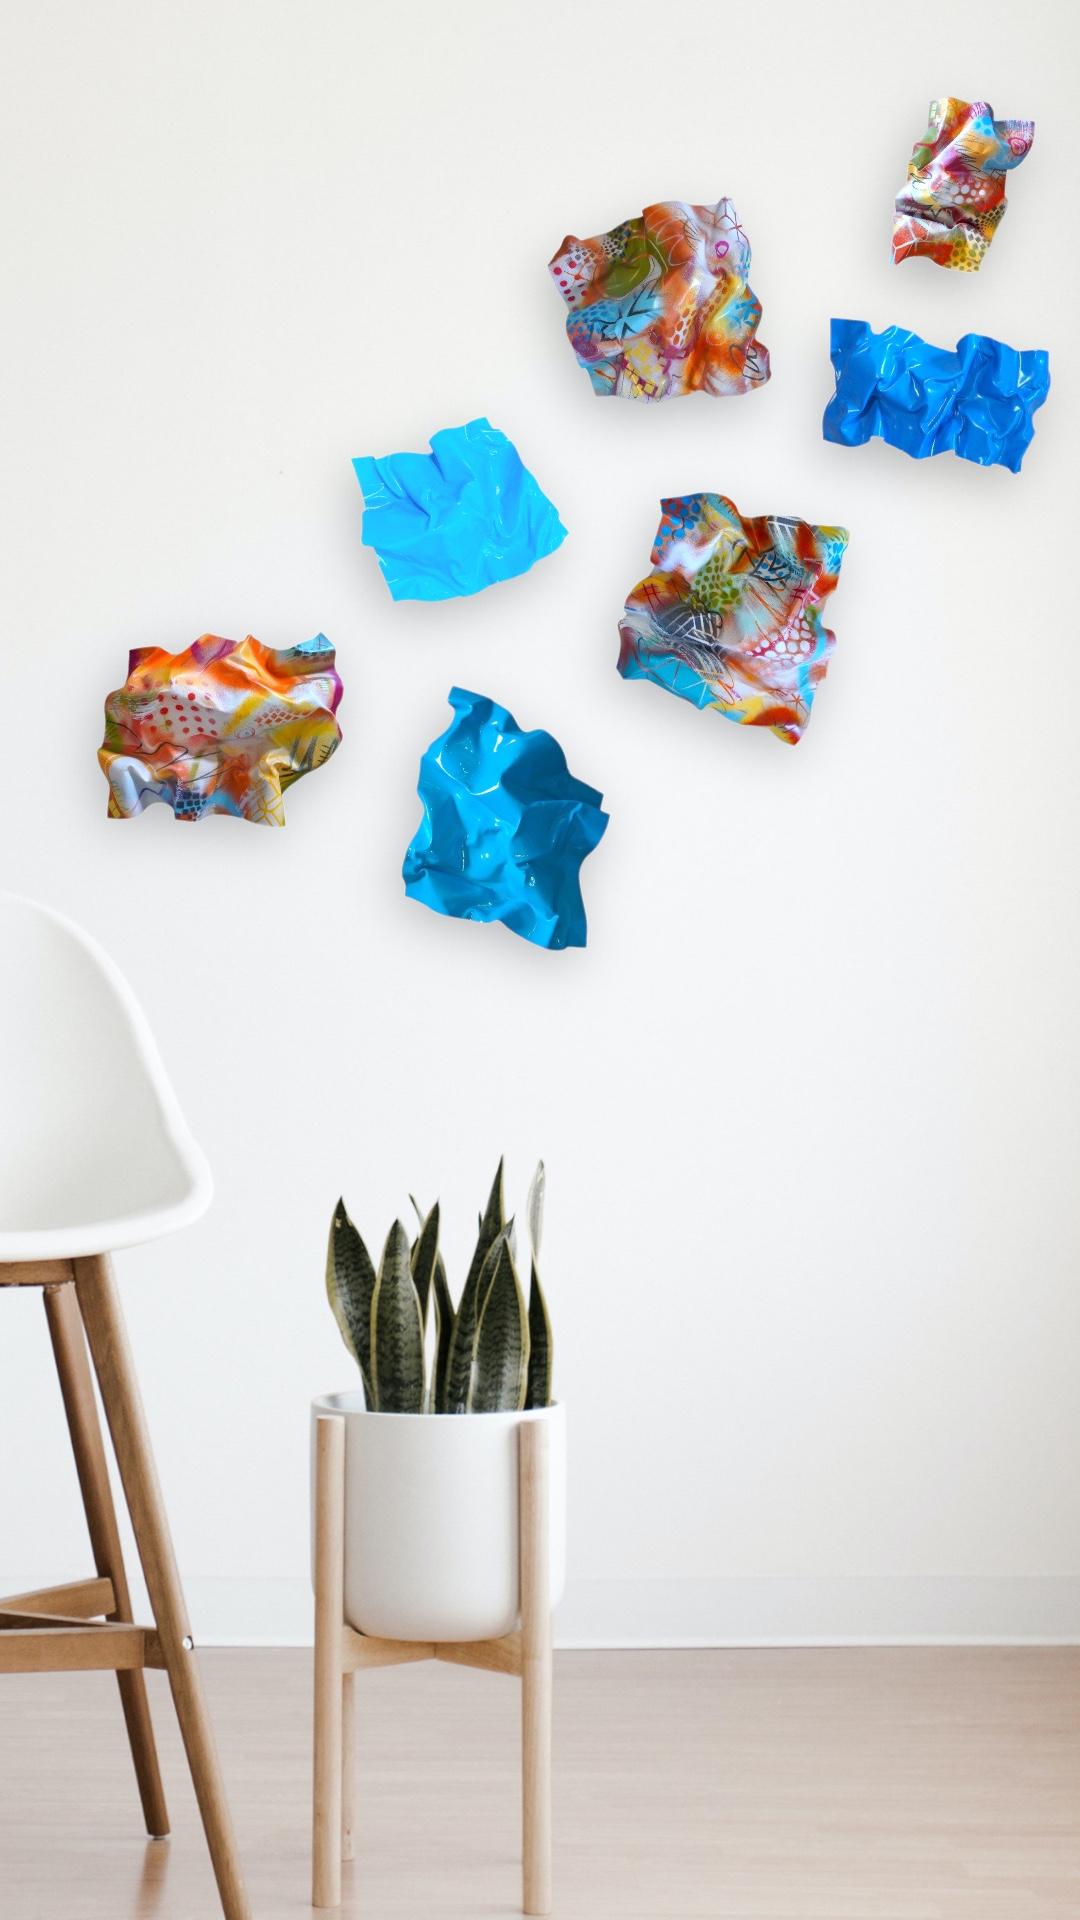 Flying Ocean Waves Abstract,Contemporary, magnets, Wall Plexiglass Painting Sculptures 2022
These wall sculptures are part of the Waves series. This mixed media wall sculptures are painted with acrylic paint, spray paint and pastels. They are